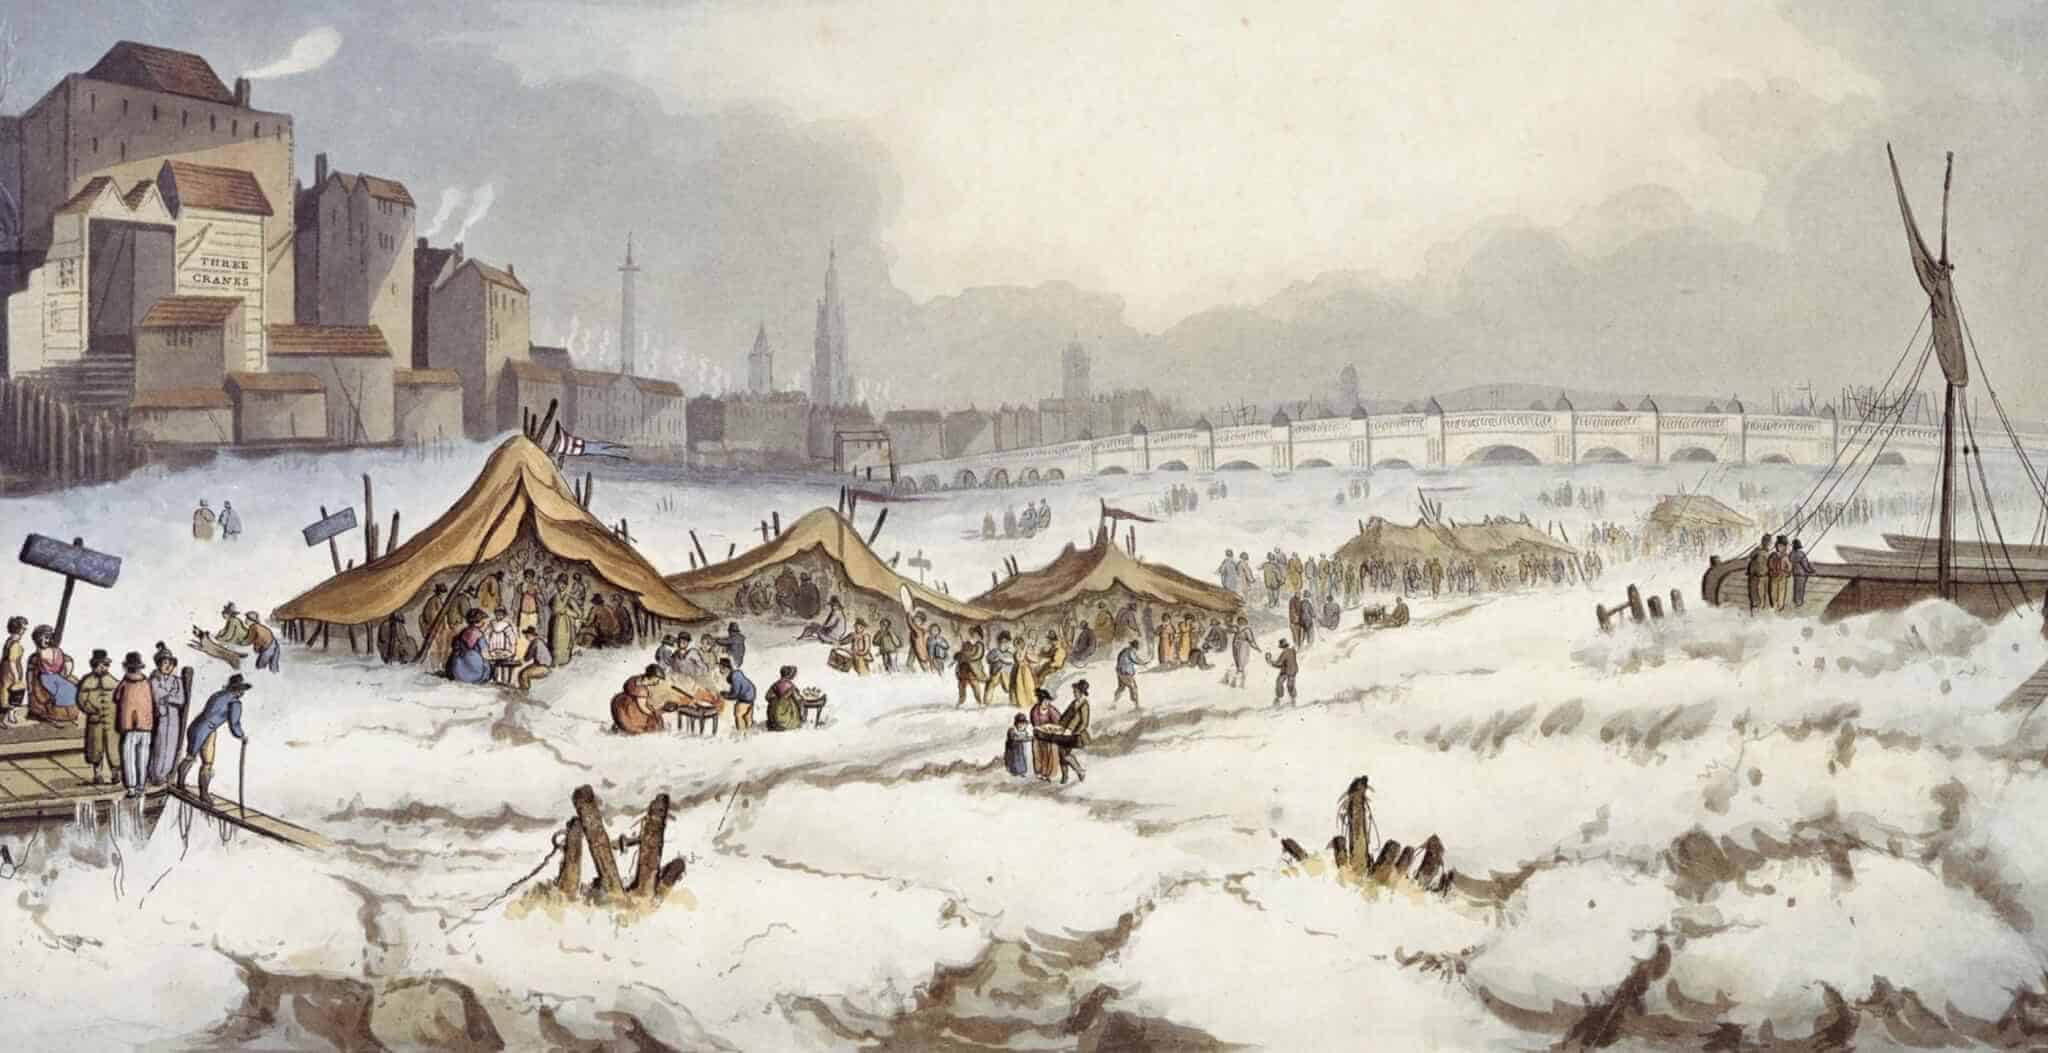 The Thames Frost Fairs in London